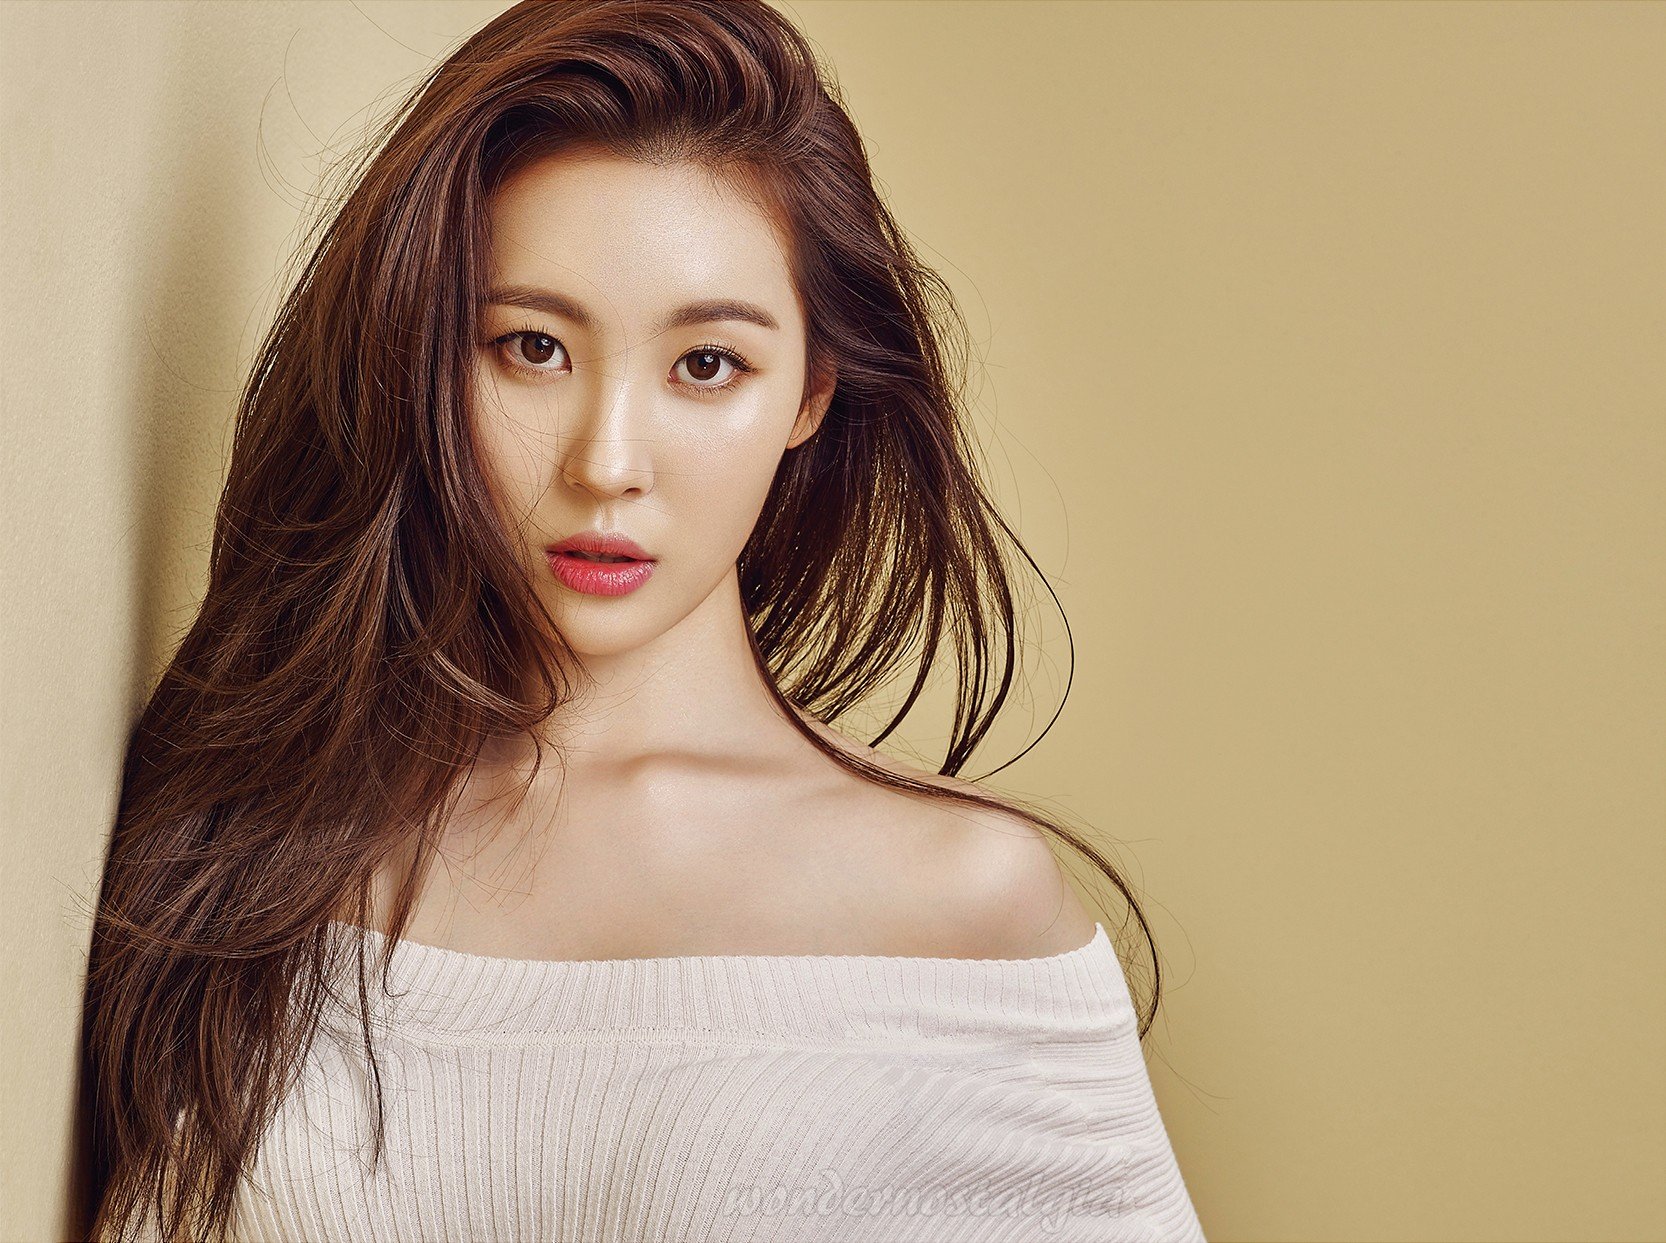 Sunmi is the ex-Wonder Girls singer who has become a K-pop star in her own right.